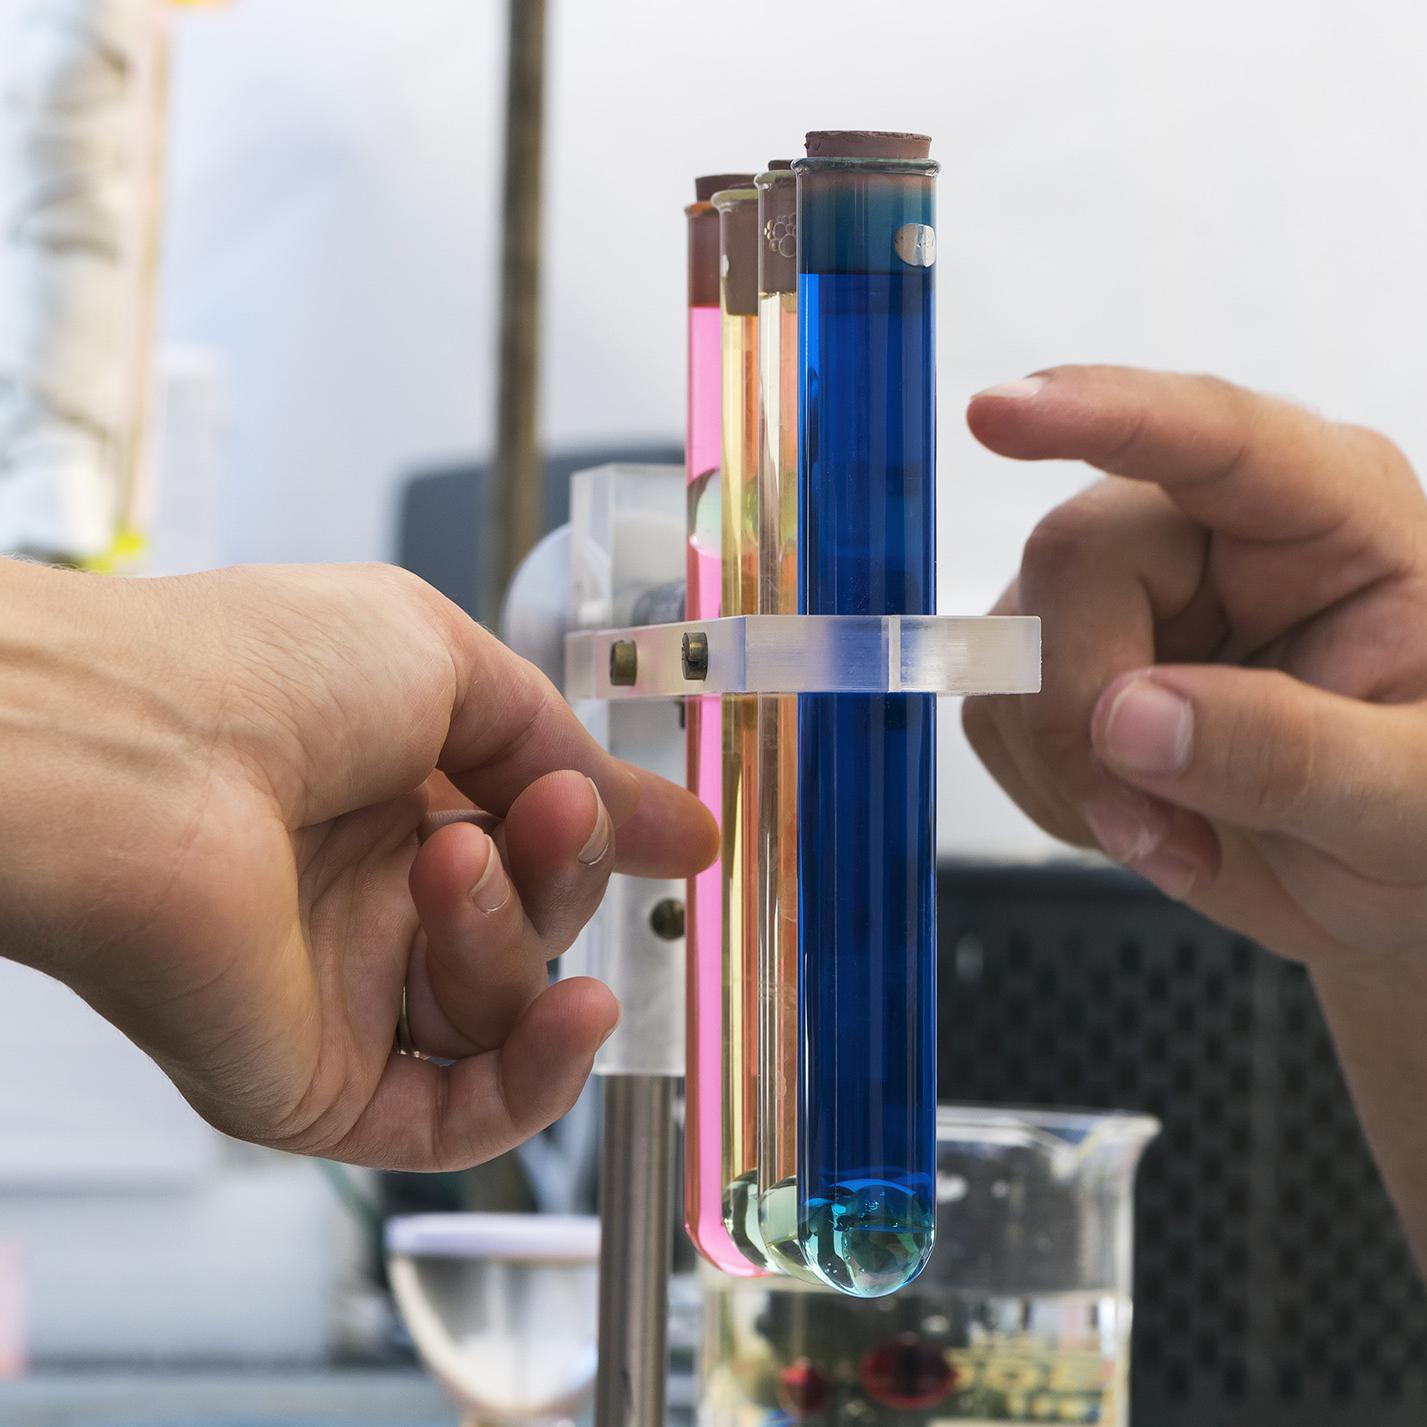 Demonstration of Viscosity of Liquids, Speed of Ball in Test Tube Descent Depends on Viscosity